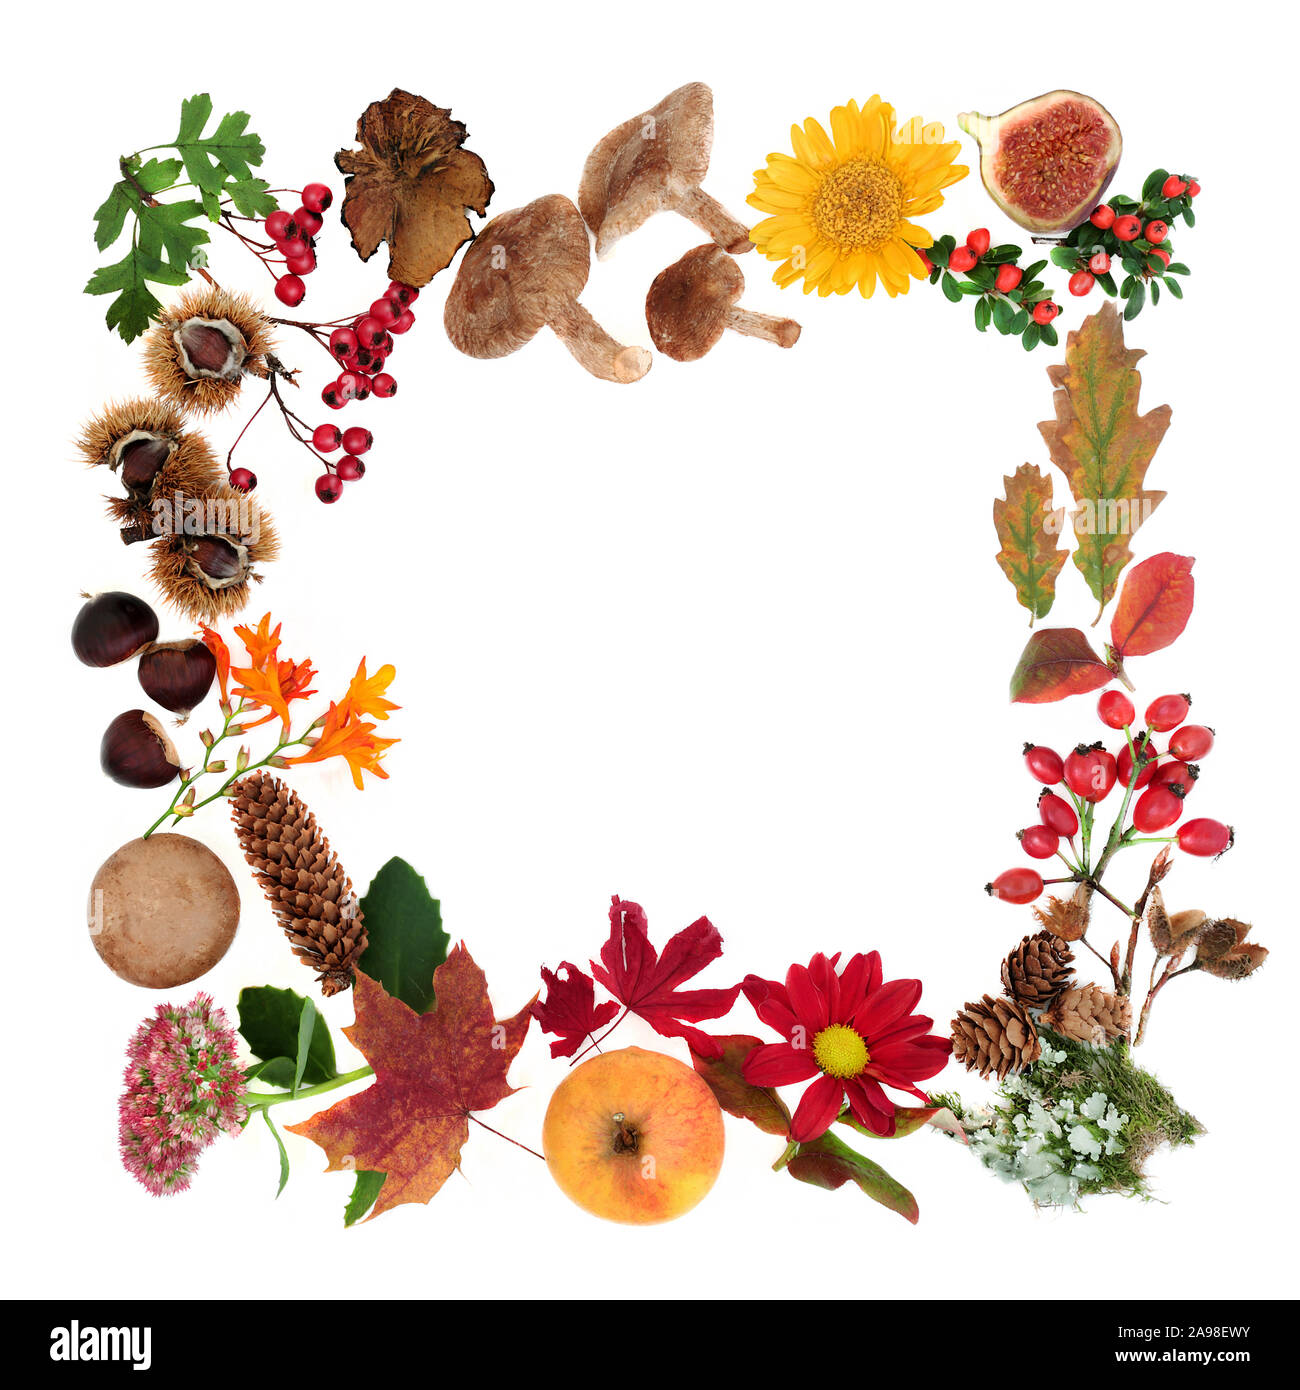 Natural Autumn wreath composition with a variety of natural flora, fauna and food on white background with copy space. Harvest festival concept. Stock Photo